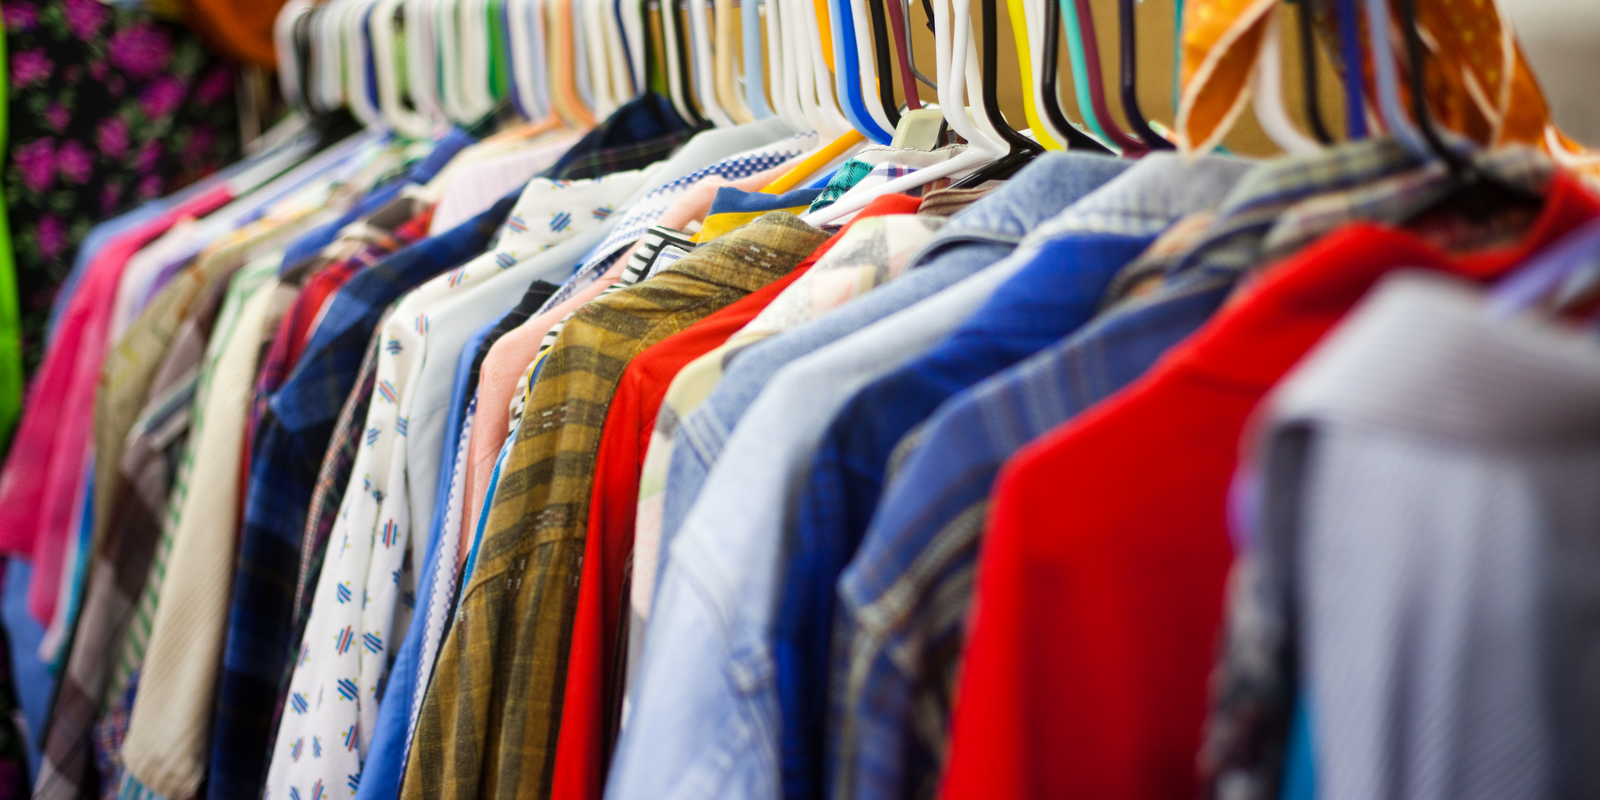 Are you a Buyer or Seller of Second-Hand Goods?